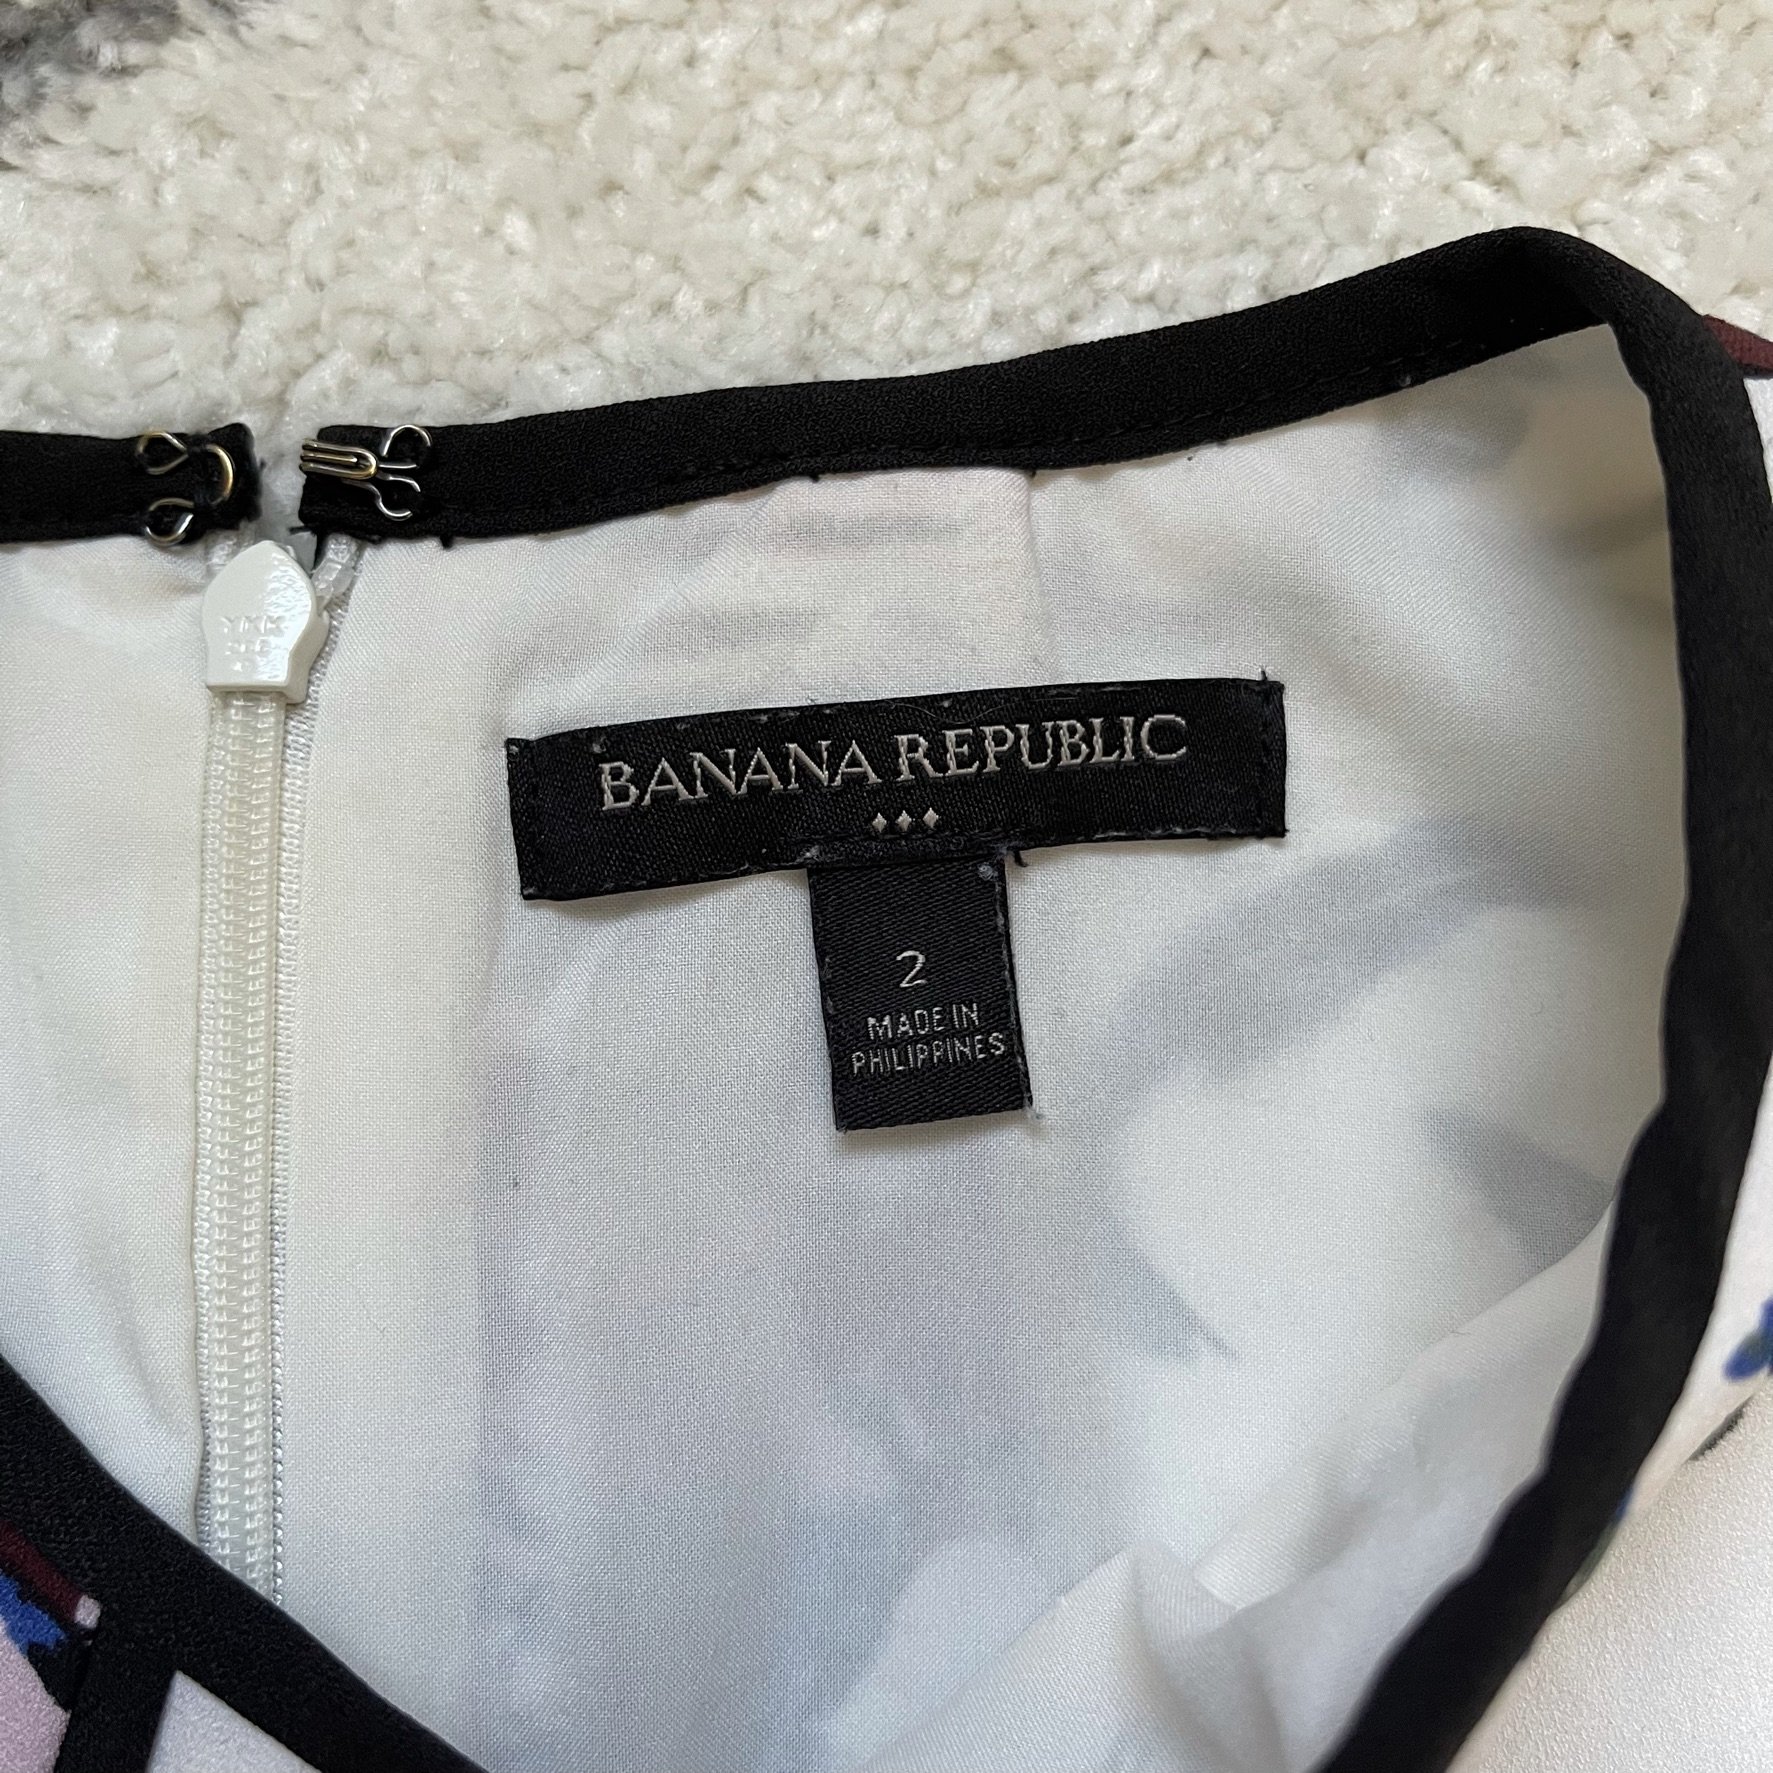 Brand and size tag